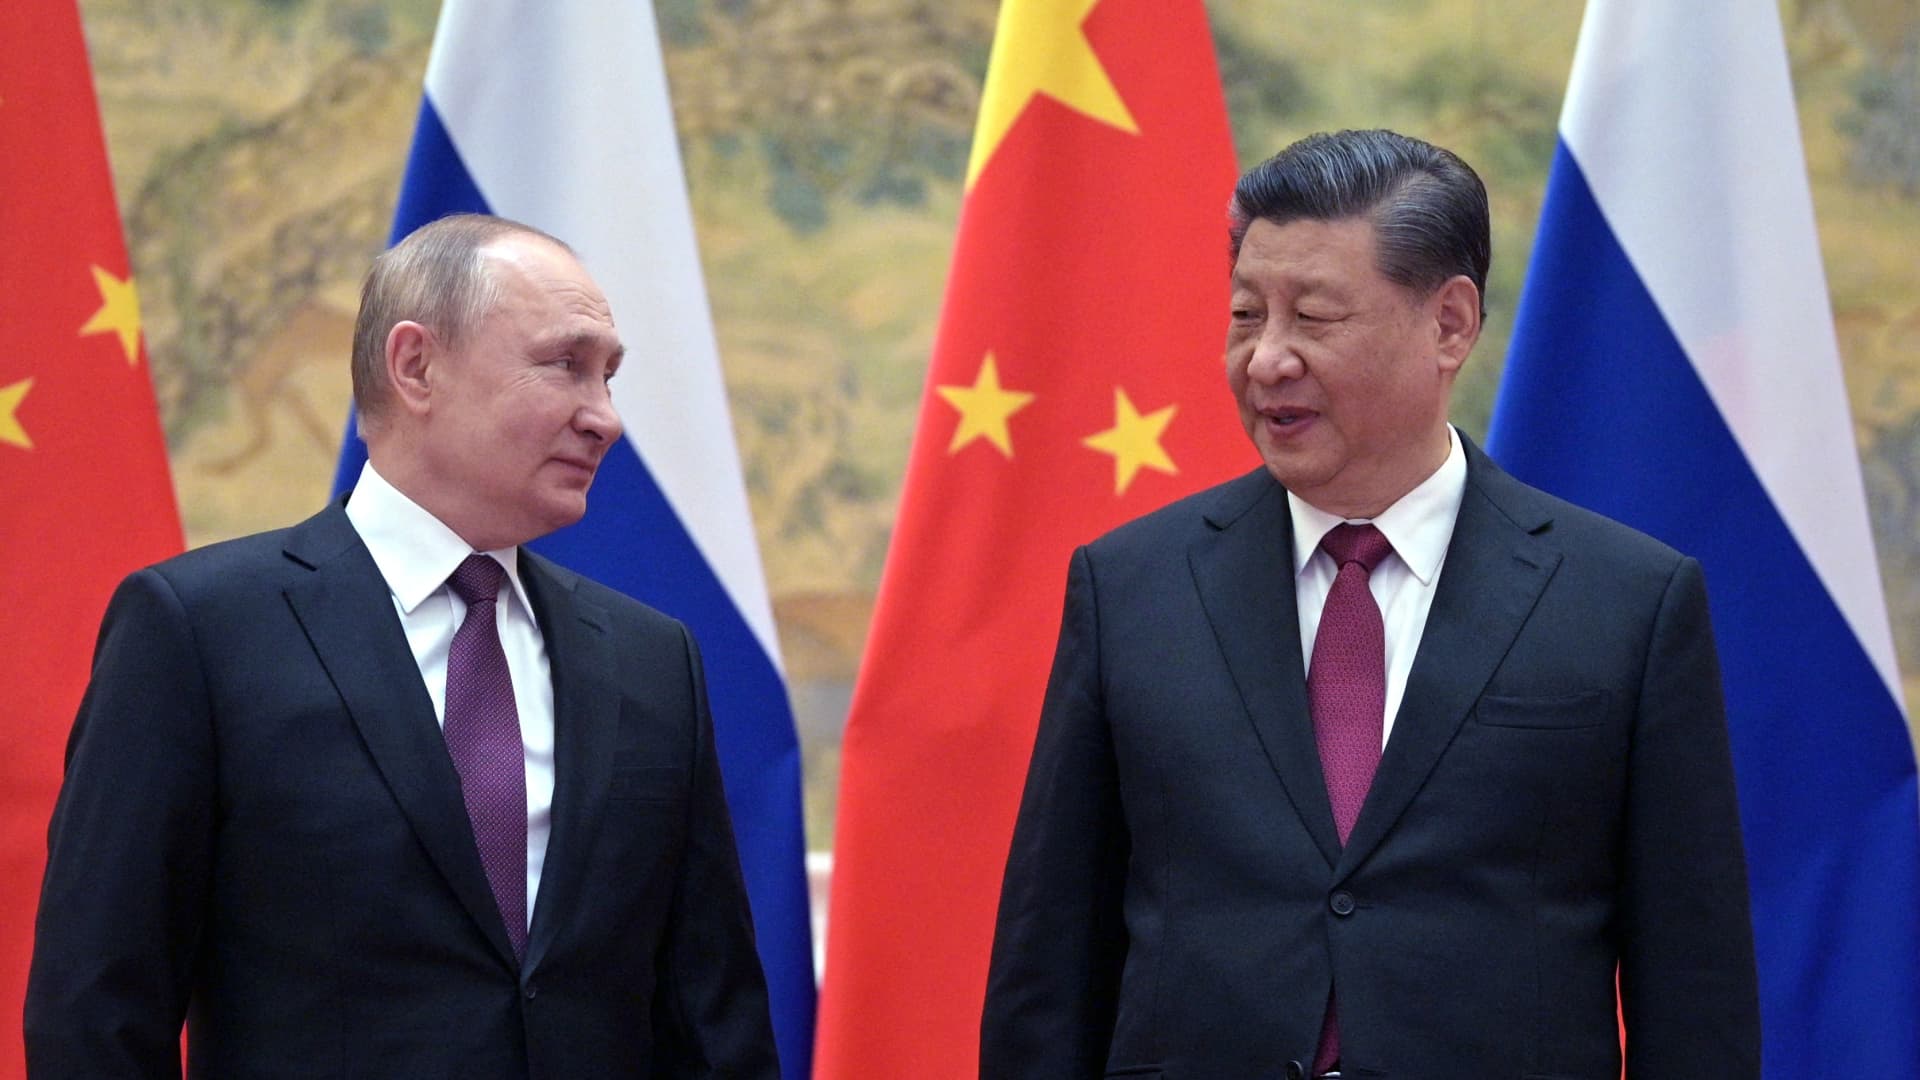 Take China and Russia’s ‘no limits’ relationship with a ‘grain of salt,’ says former PBOC advisor